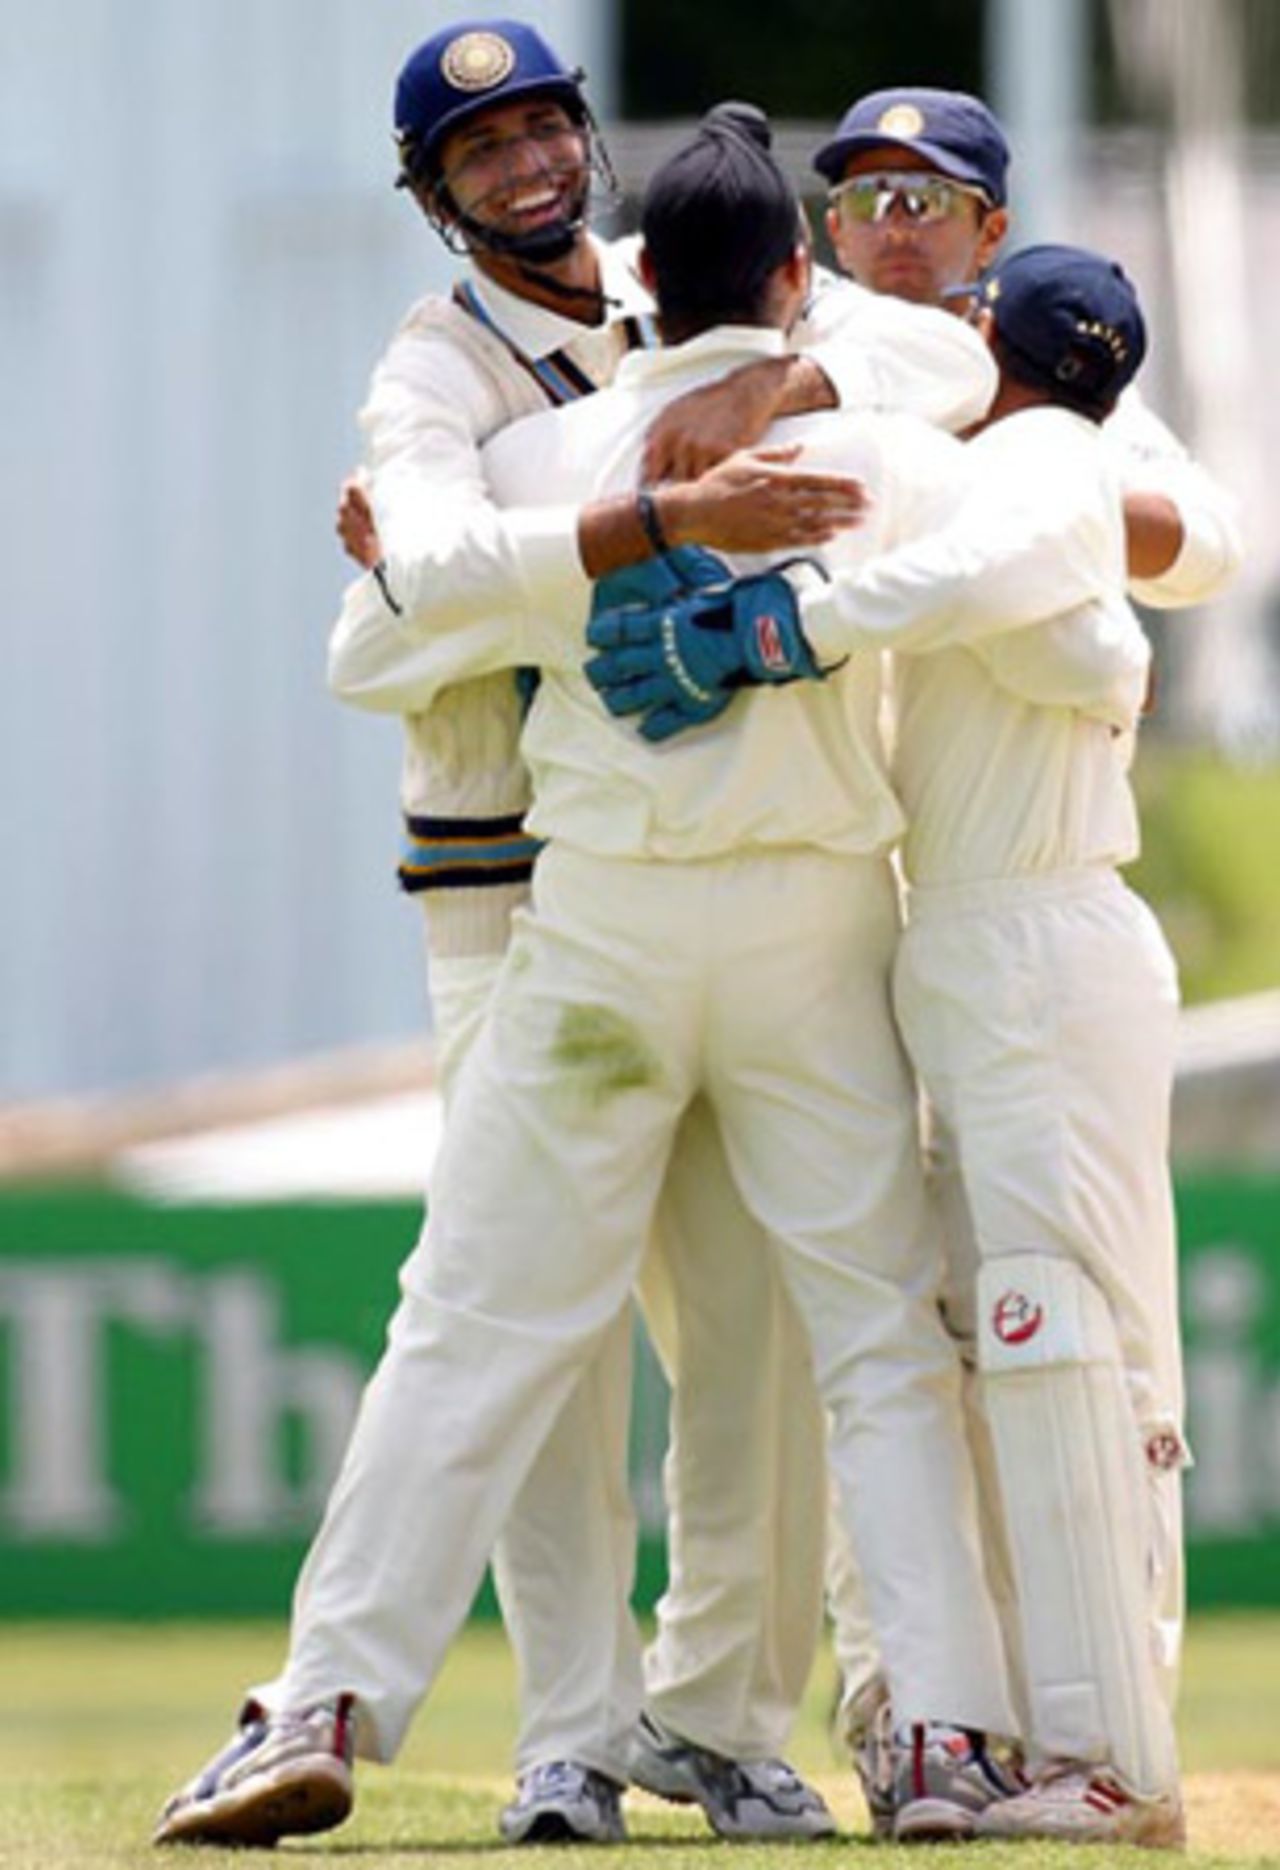 Members of the Indian team celebrate the dismissal of New Zealand batsman Scott Styris, lbw to Harbhajan Singh for 13 in his first innings. From left: VVS Laxman, Harbhajan, Rahul Dravid and Parthiv Patel (facing away). 2nd Test: New Zealand v India at Westpac Park, Hamilton, 19-23 December 2002 (21 December 2002).